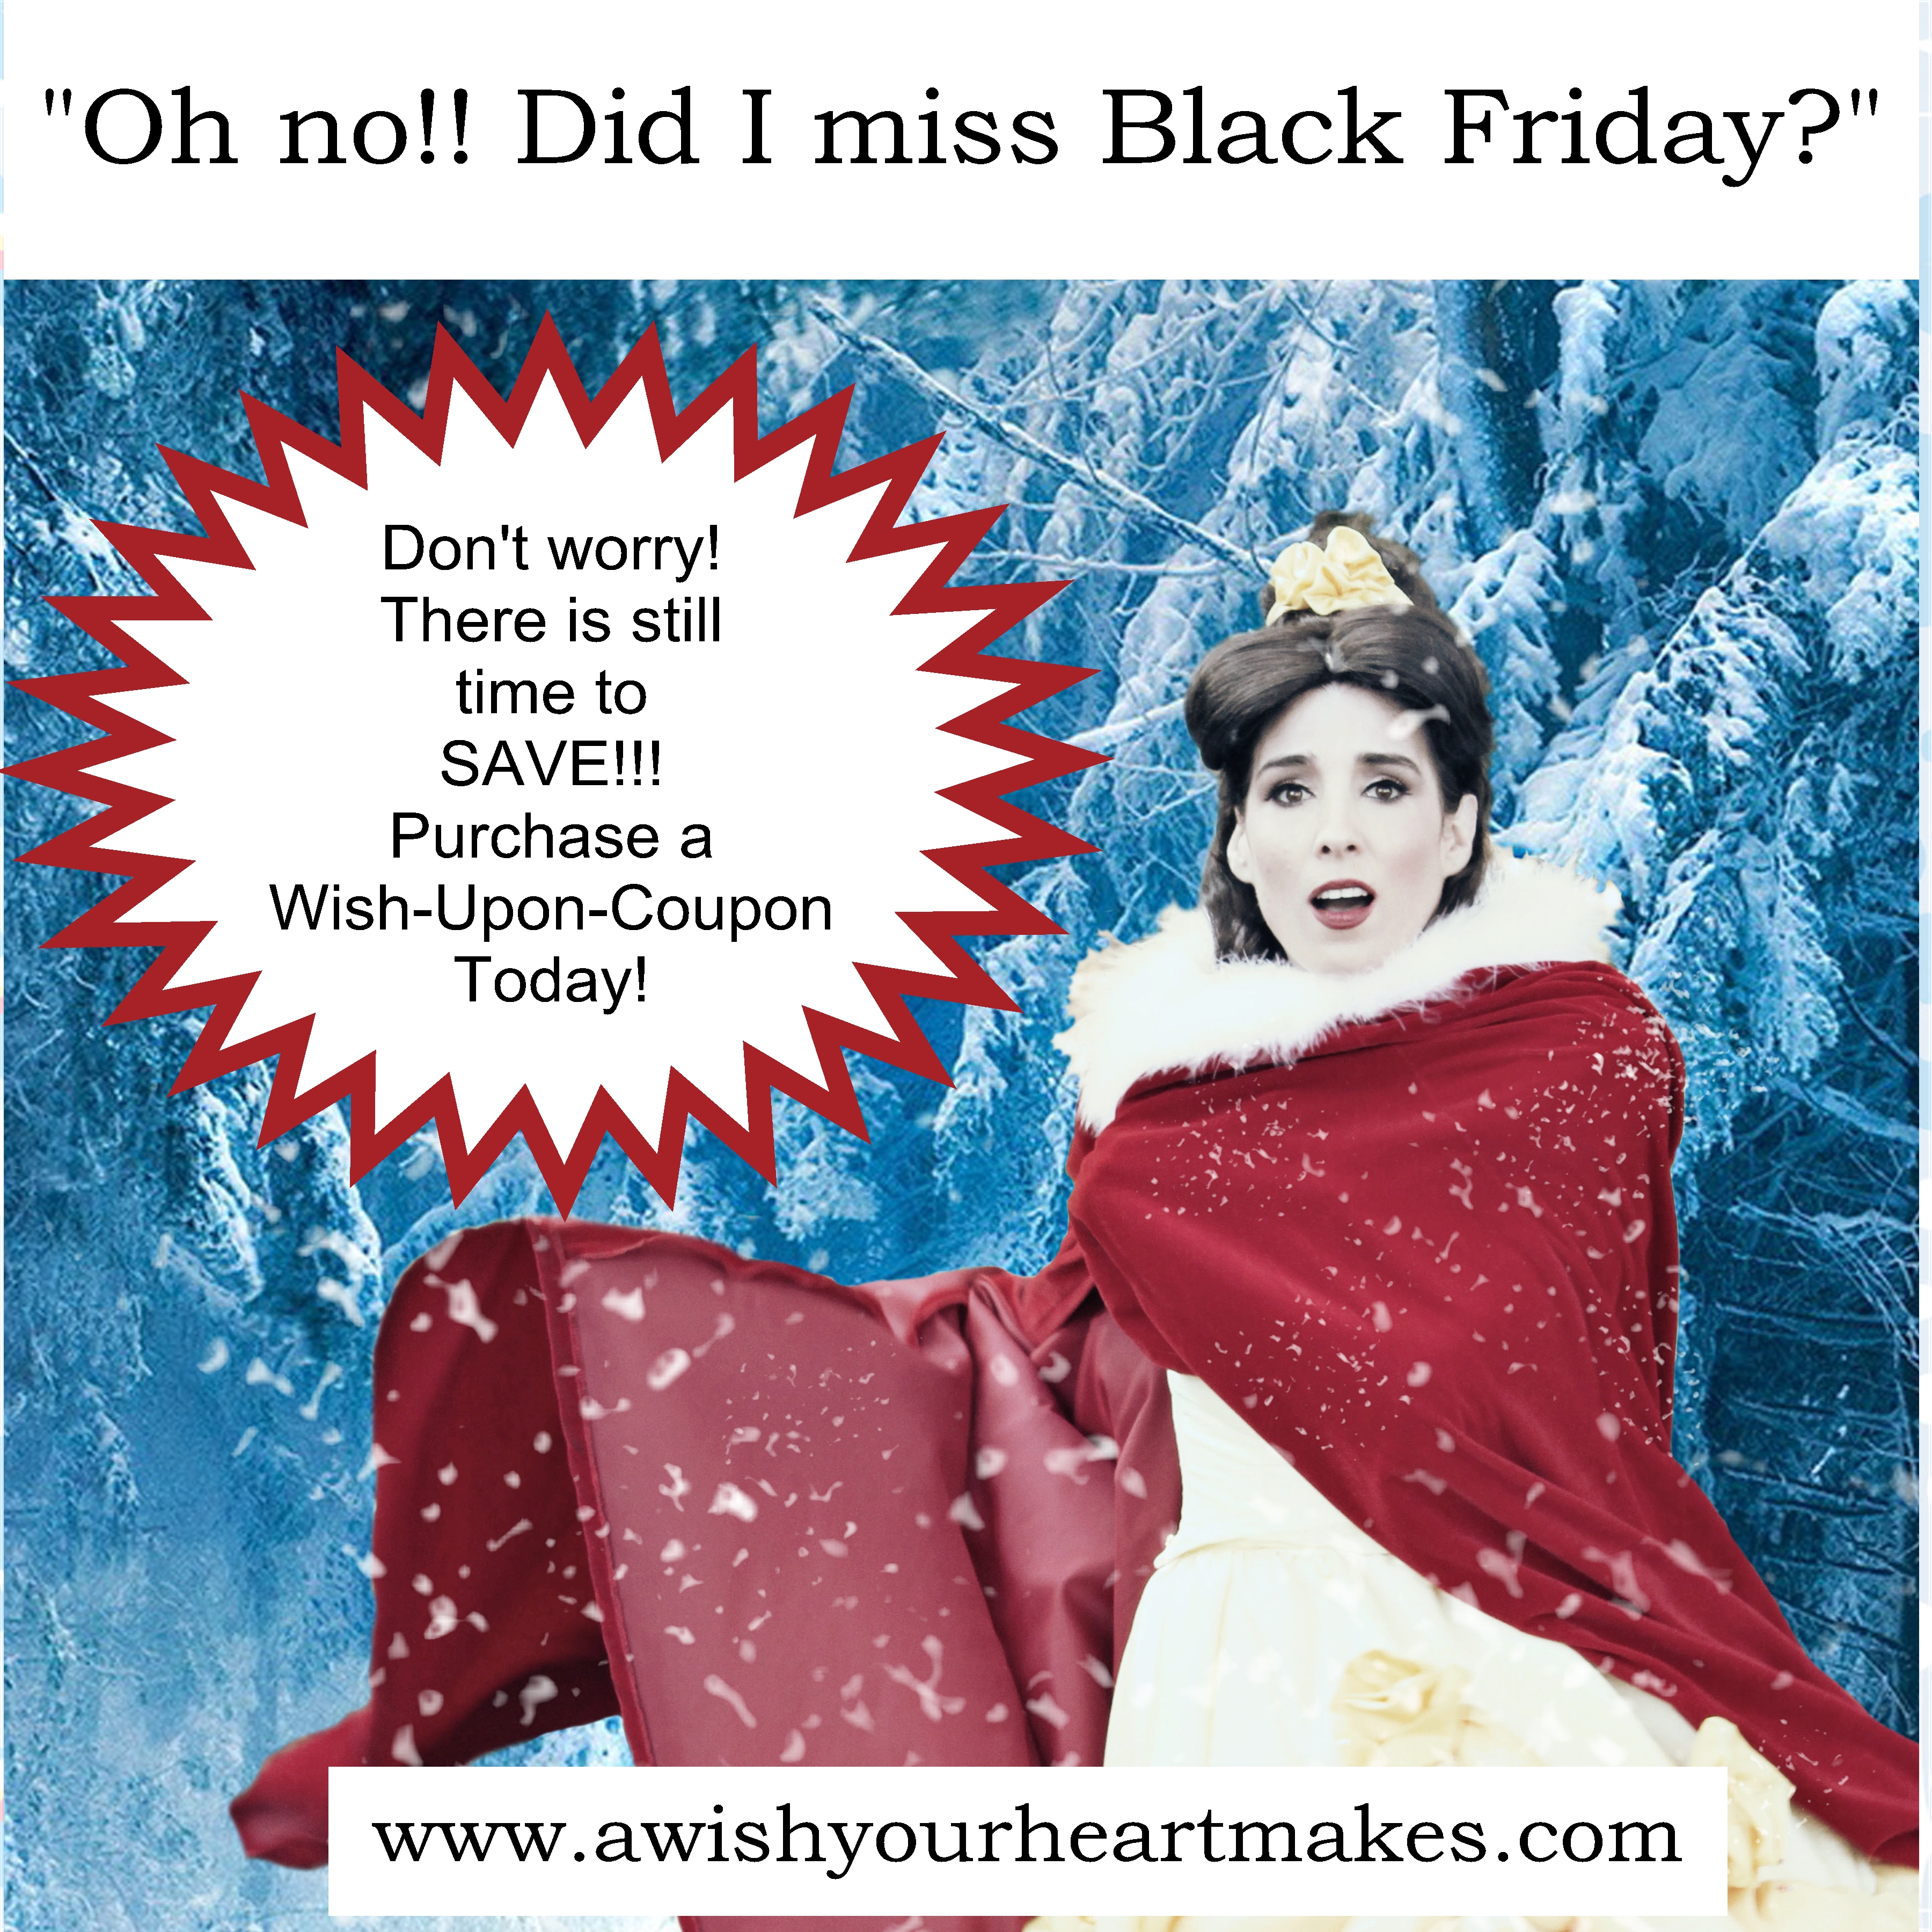 Wish Upon Coupon, www.aWishYourHeartMakes.com, fairytale parties, Central Valley and Central Coast, California